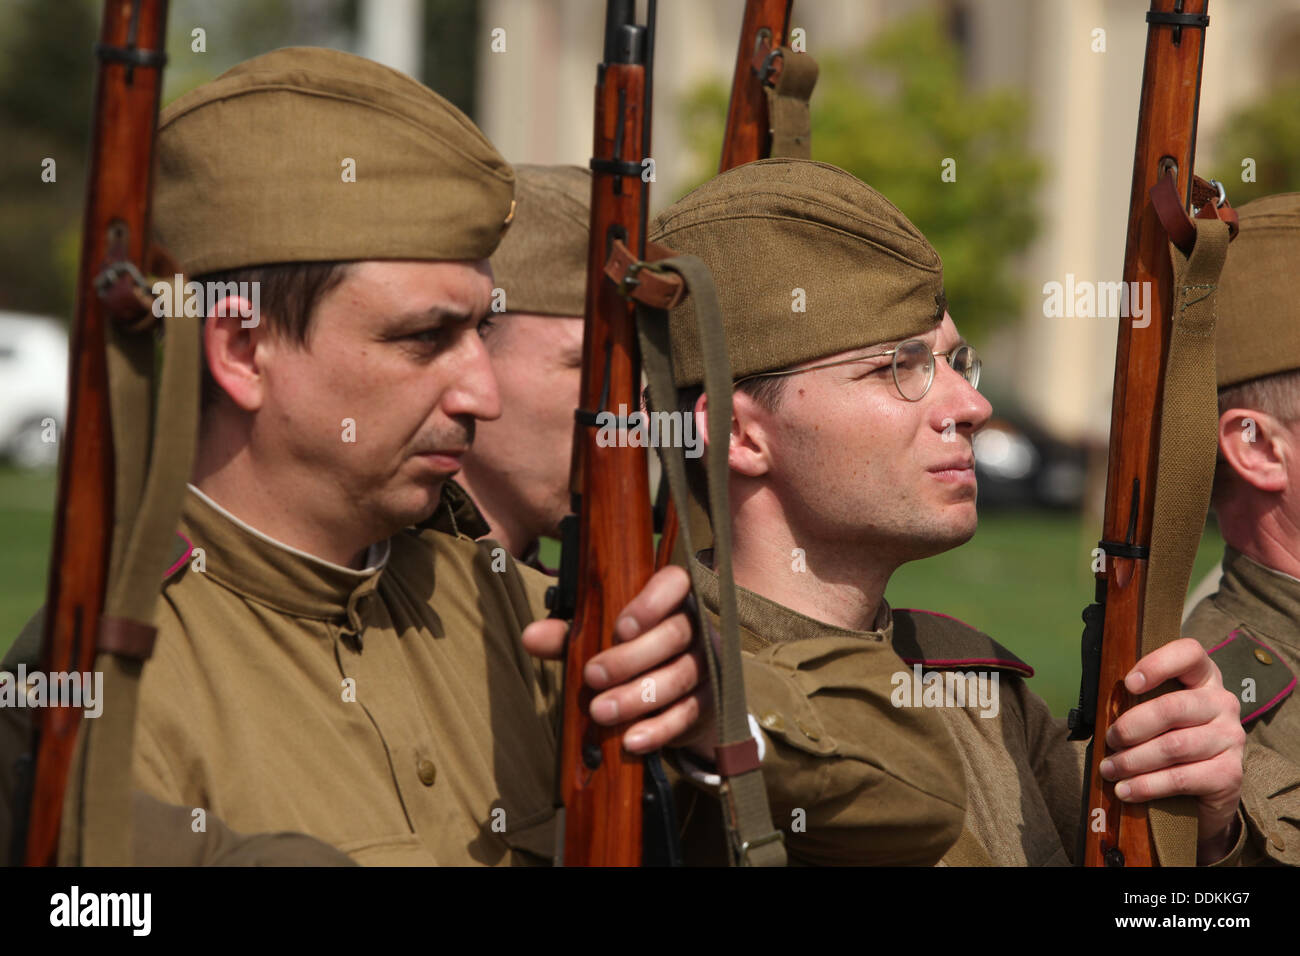 Re-enactors dressed as Soviet soldiers attend a ceremony at the cemetery in Orechov, Czech Republic. Stock Photo